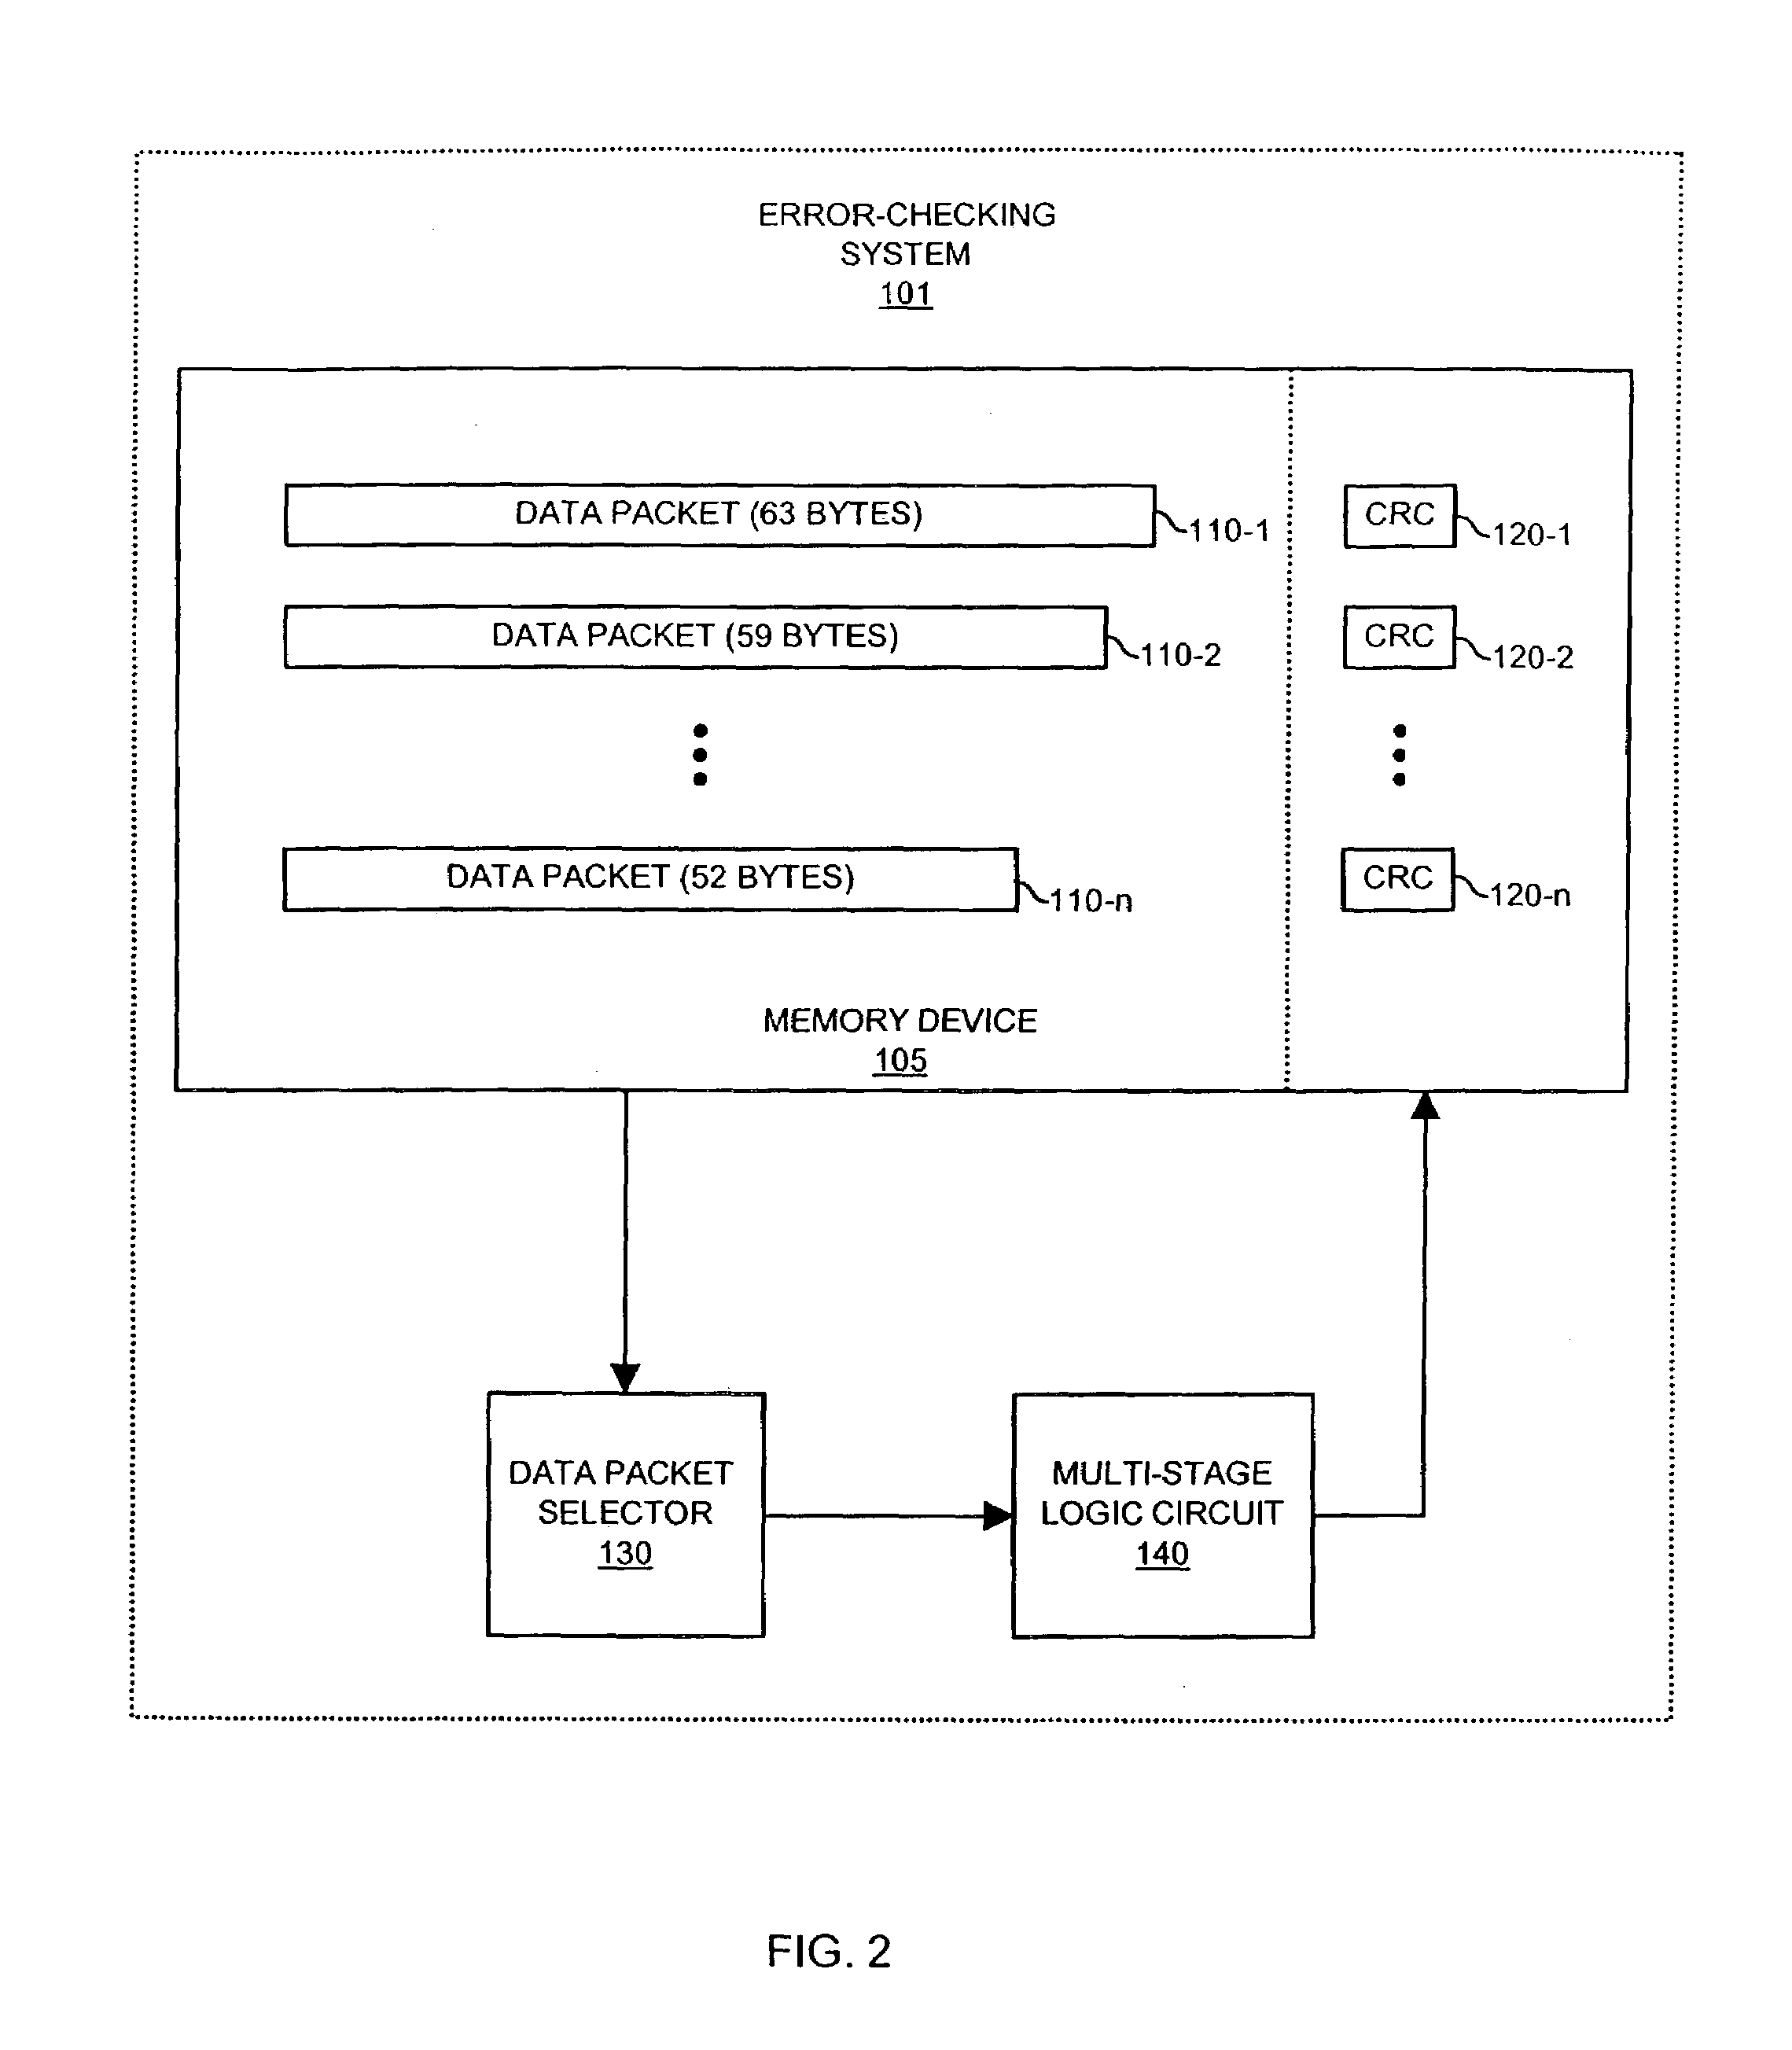 Methods and apparatus to support error-checking of variable length data packets using a multi-stage process